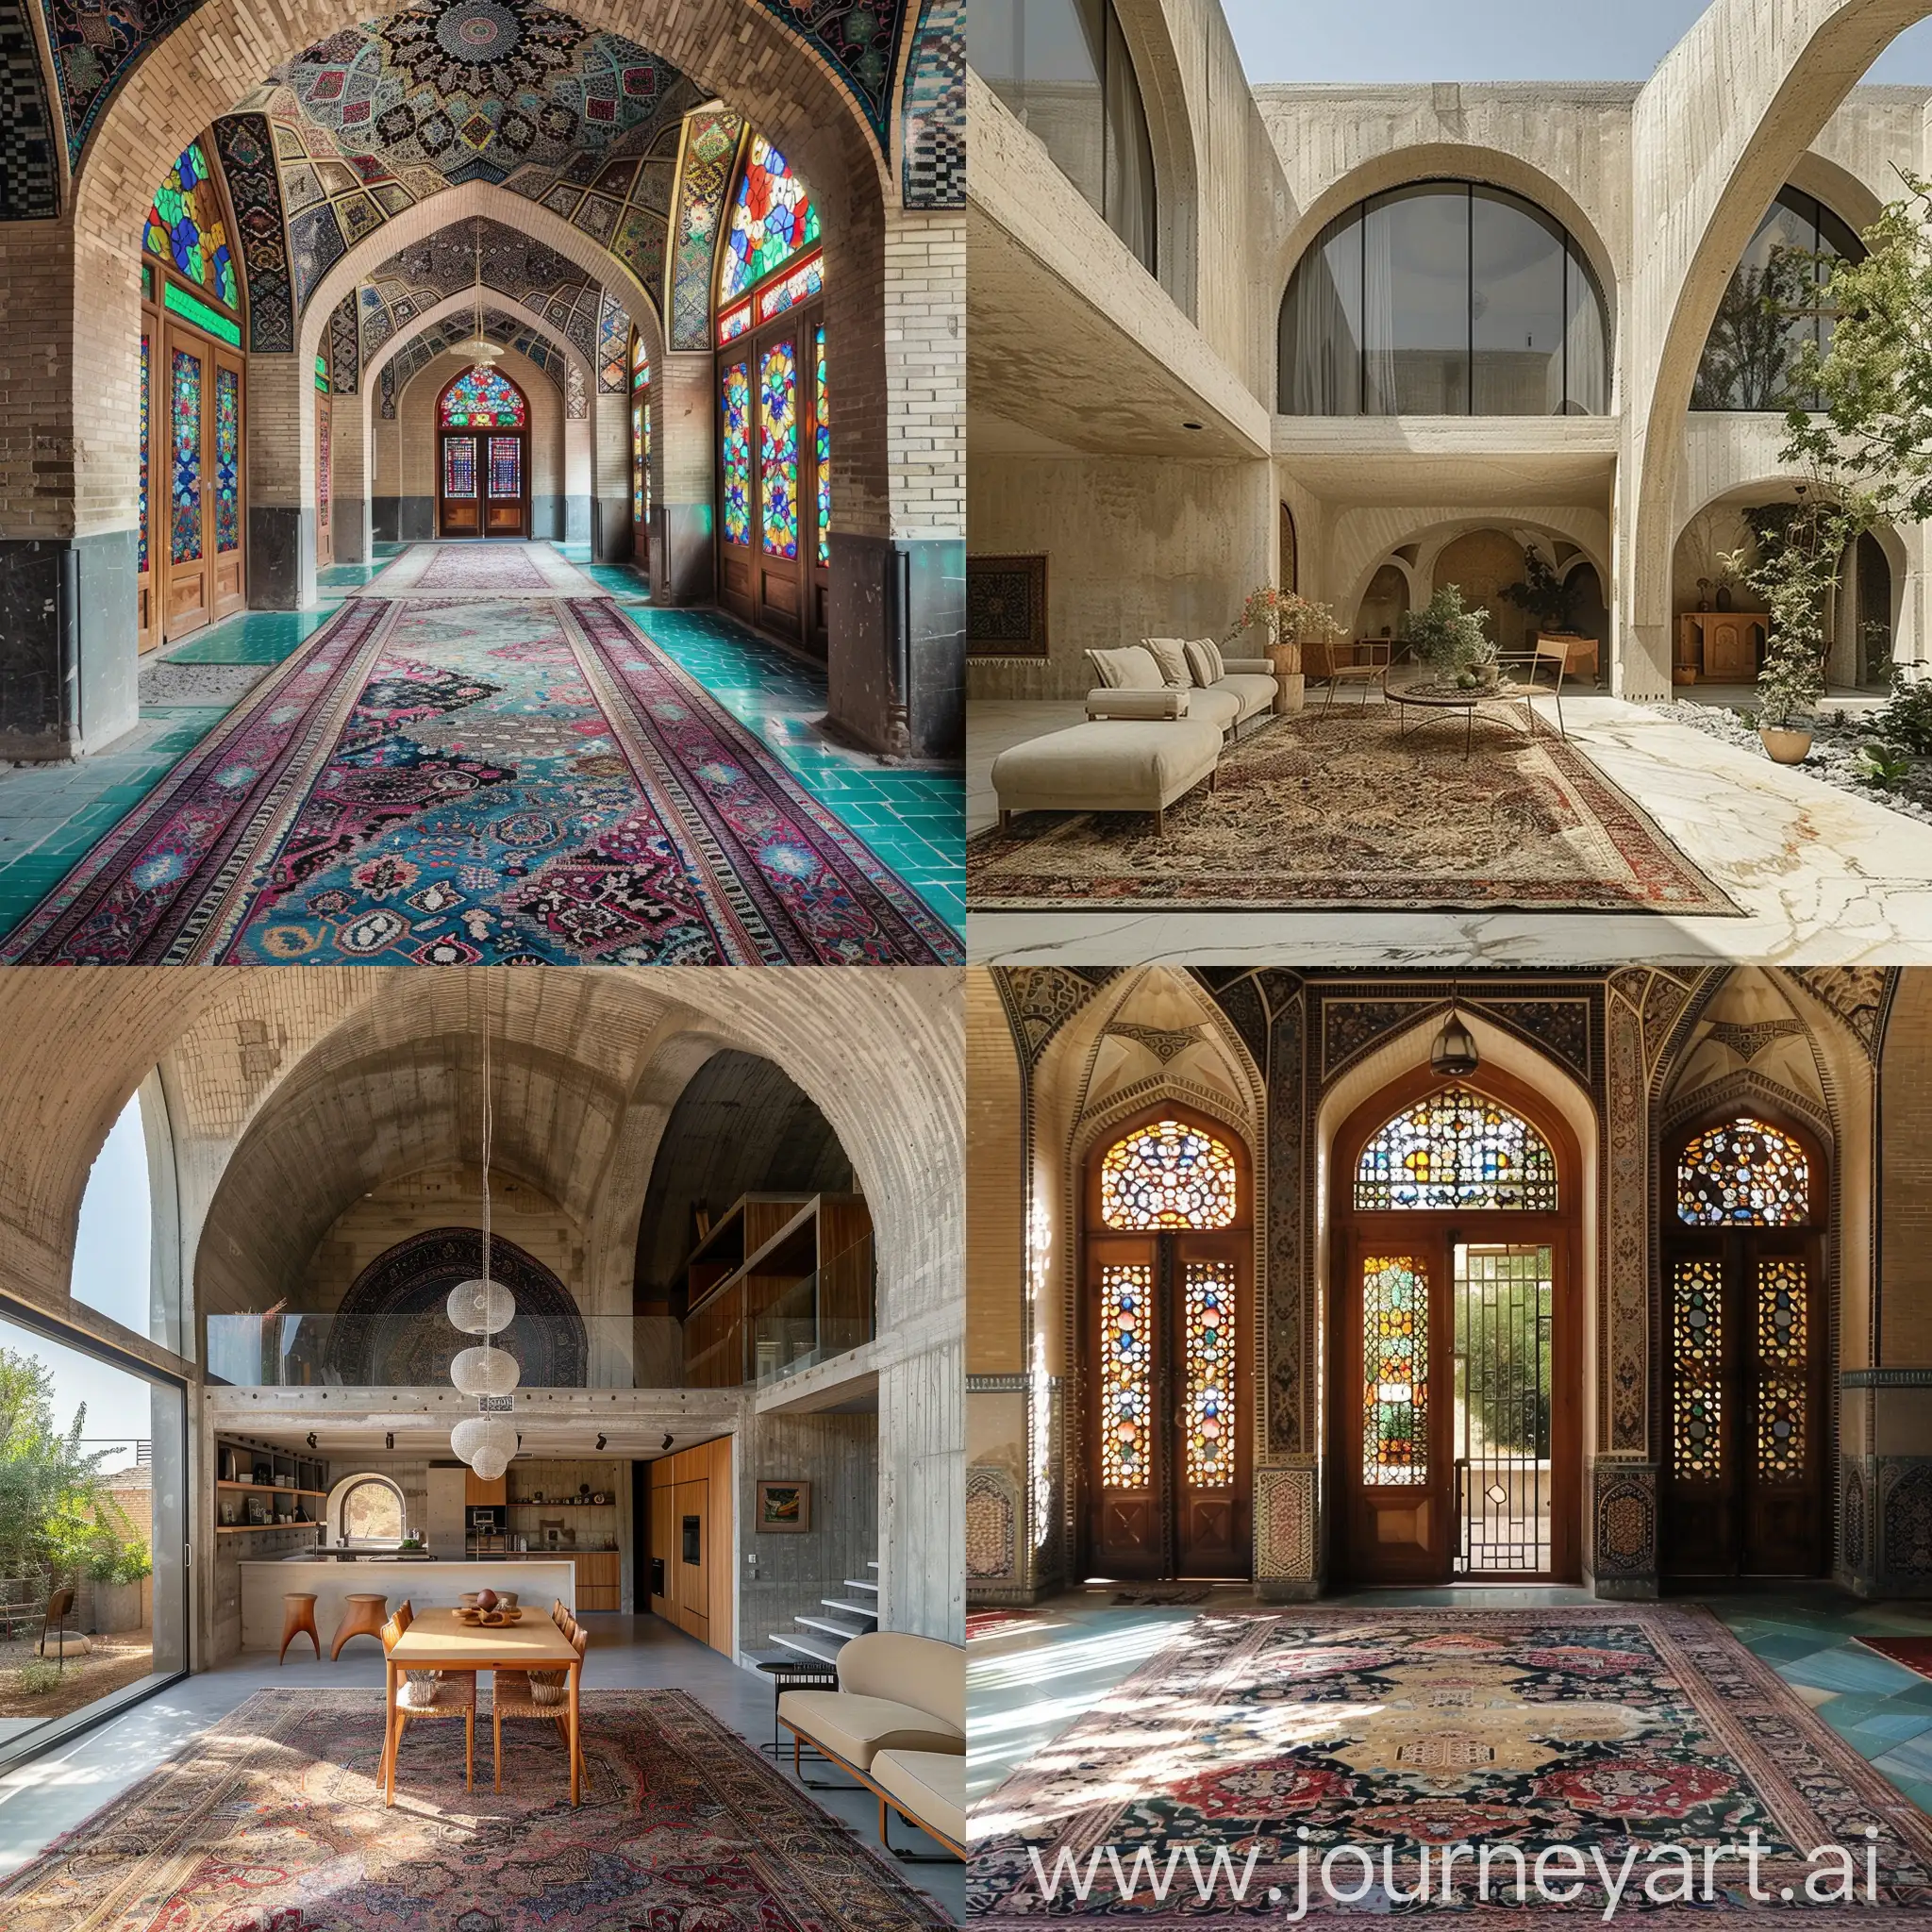 The integration of Iranian carpets in Iranian architecture